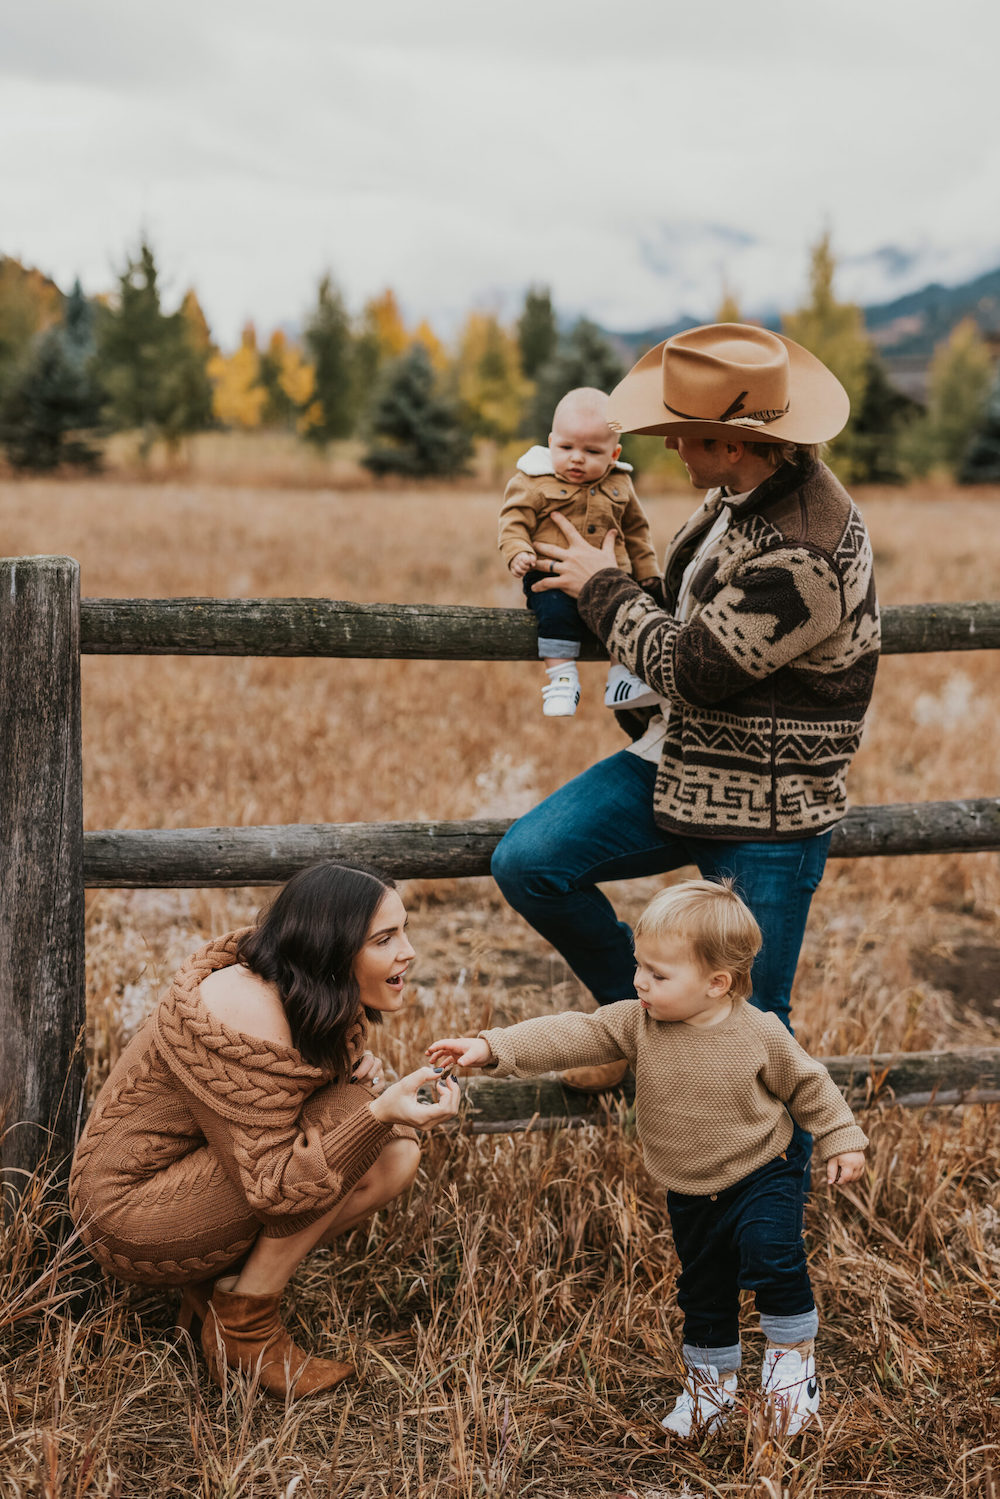 image of a family with a man, woman, toddler, and baby against a wooden fence in a field wearing neutral clothing and the man is in a cowboy hat